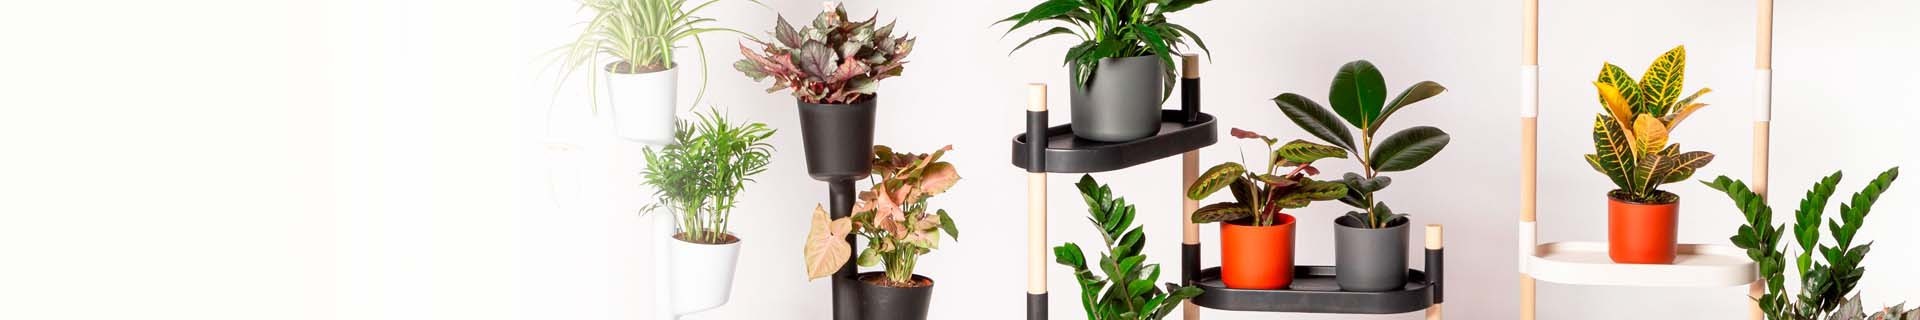 CitySens best-selling products: vertical planters, plant shelves and wall planters.